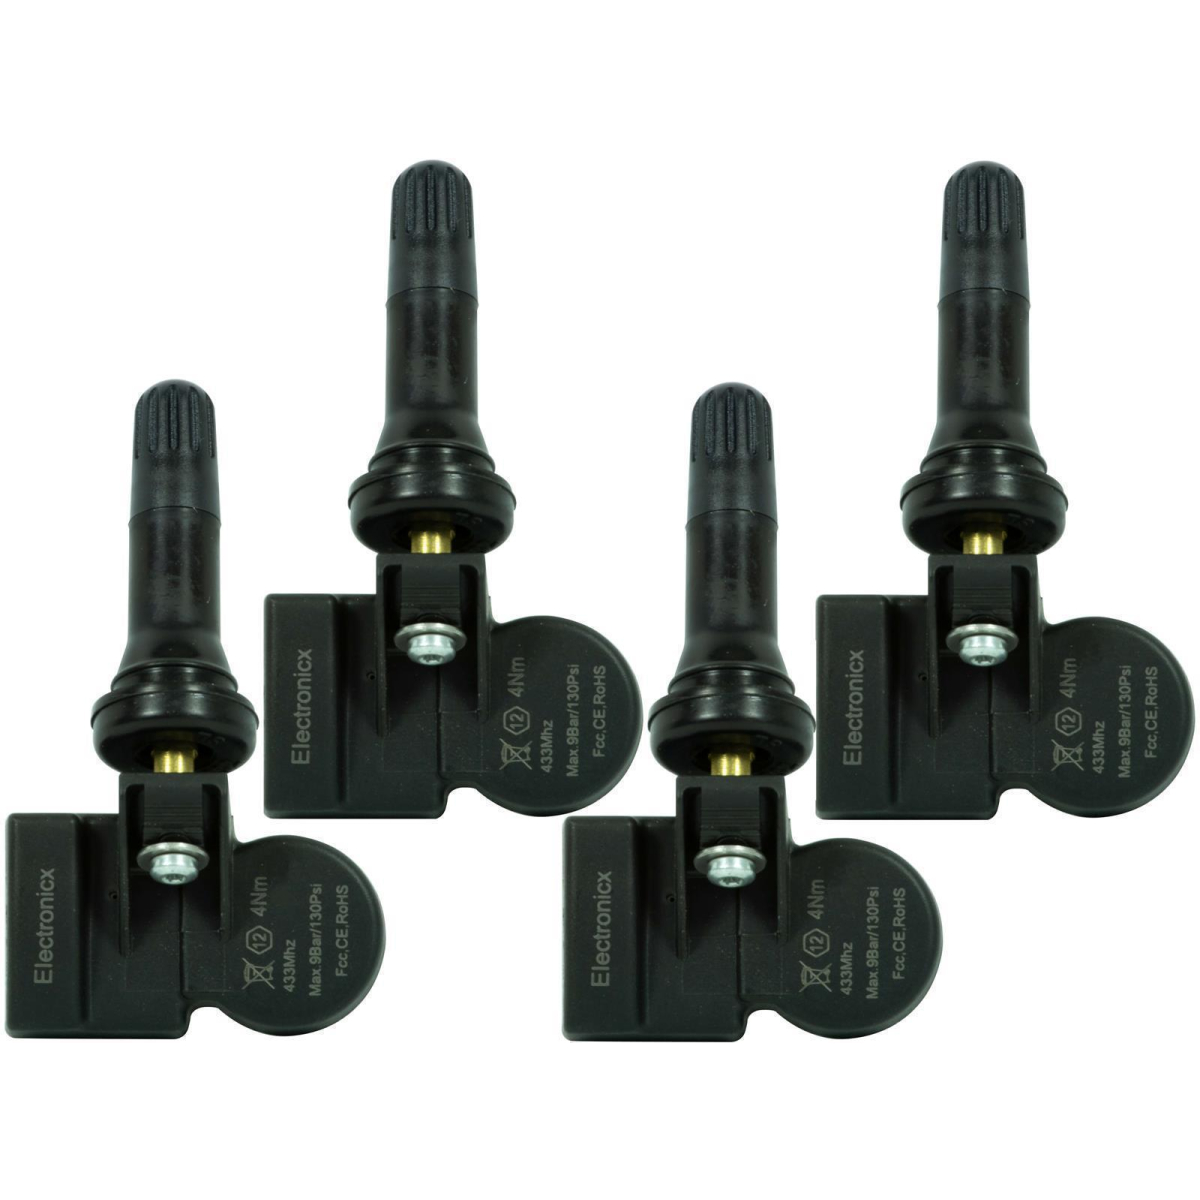 4x RDKS TPMS tire pressure sensors Rubber valve for Dongfeng 580 2017 2018 2019 3641050SA04